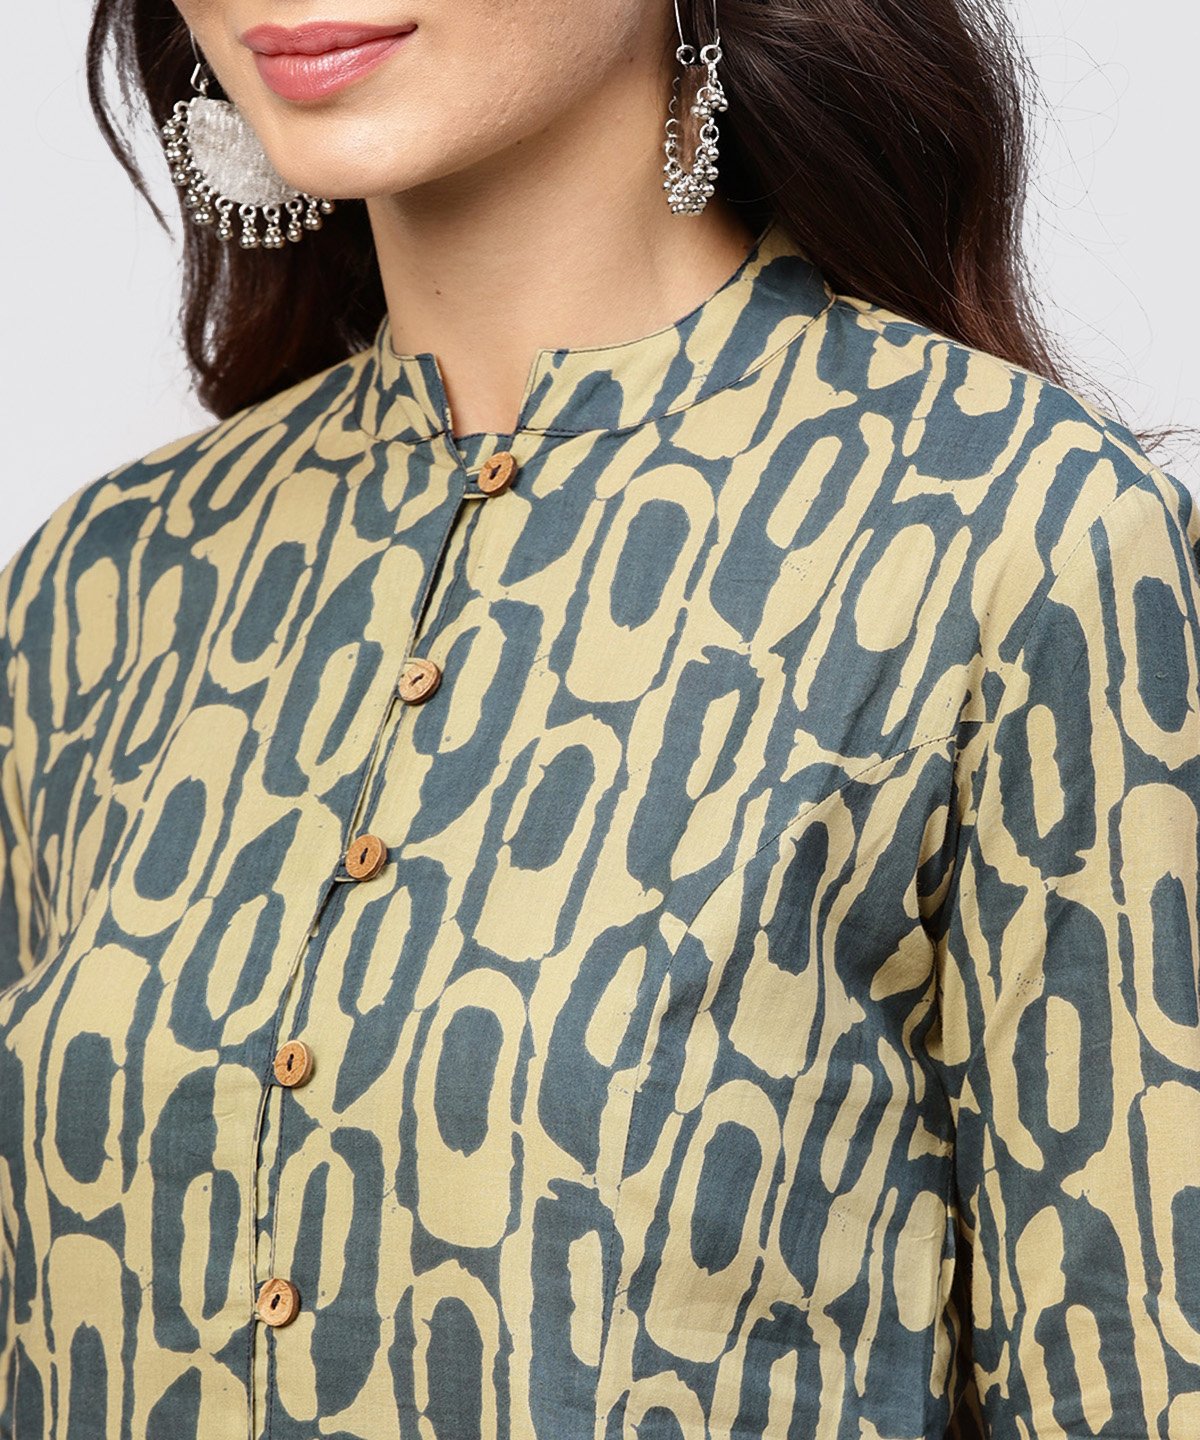 Women's Green Printed Panelled Cut A-Line Kurta With Madarin Collar And Front Placket - Nayo Clothing